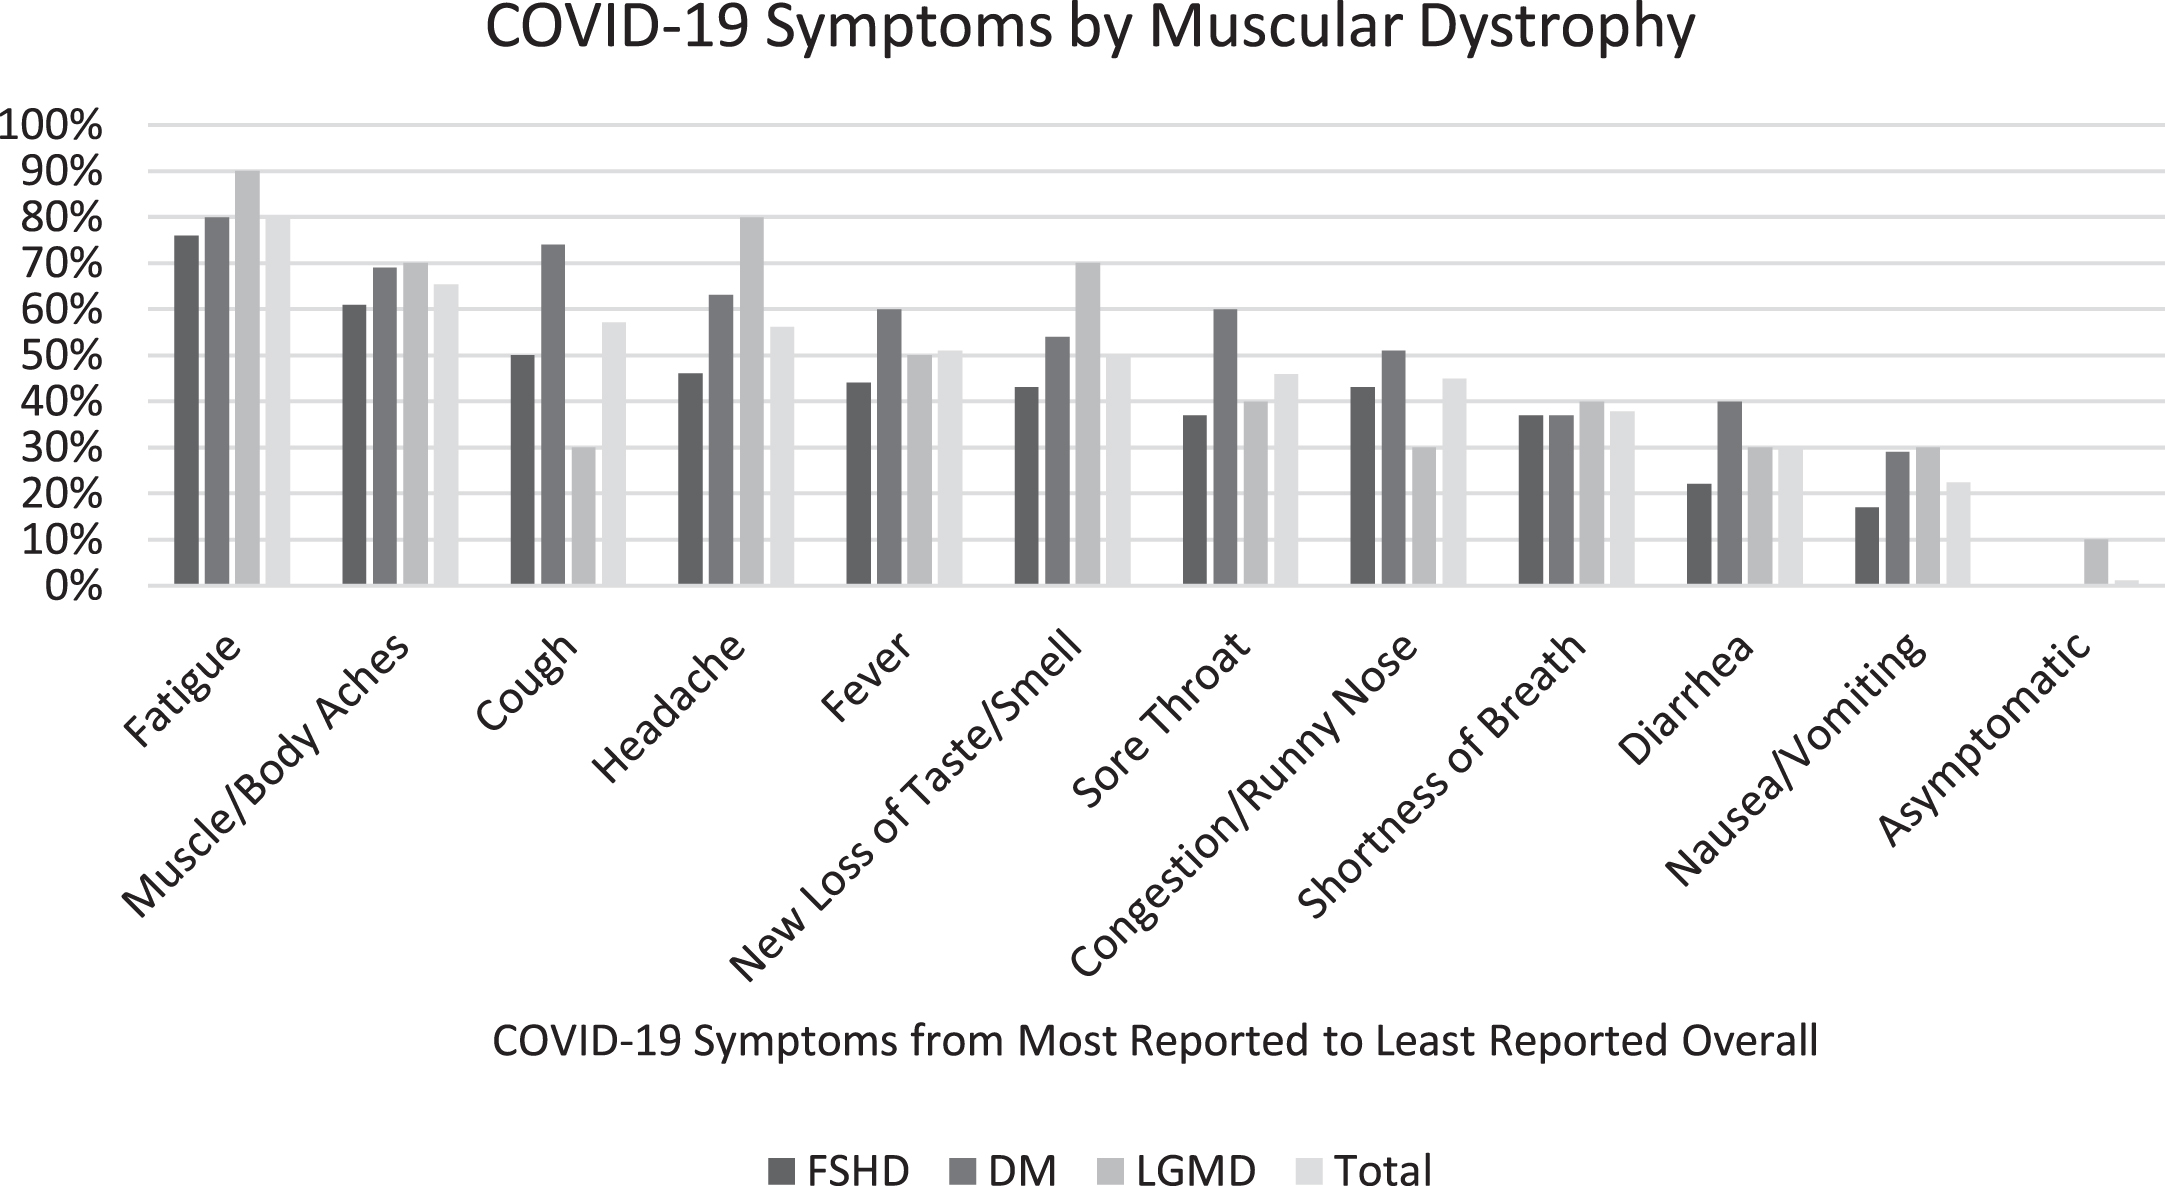 Symptoms experienced and reported by individuals with MD.